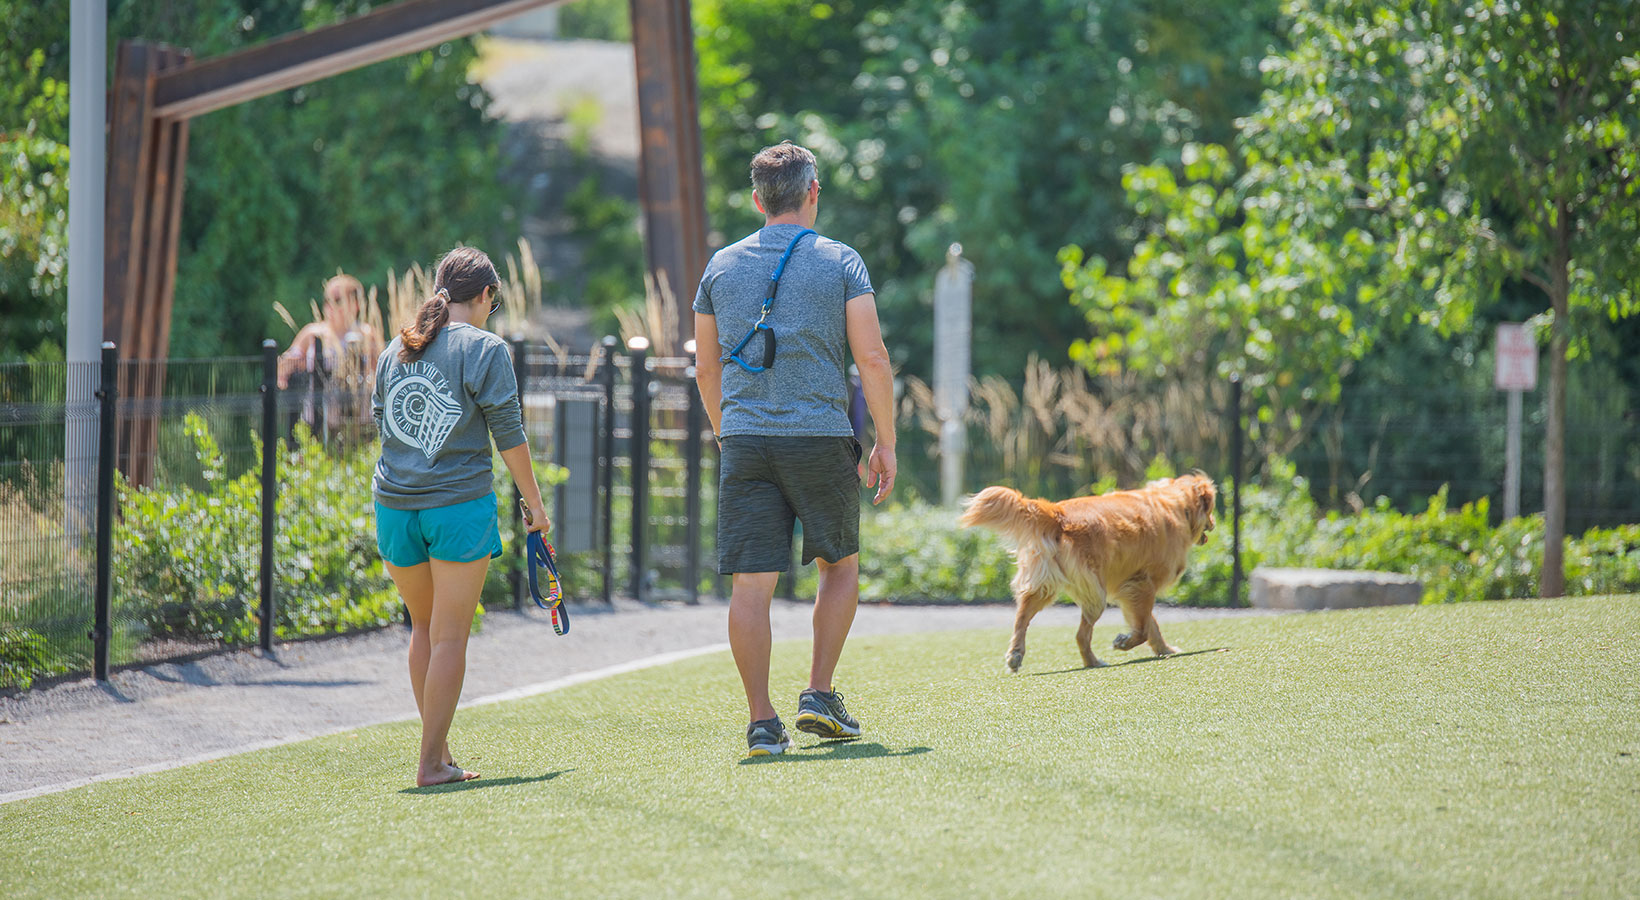 Your new neighborhood is a pet friendly community